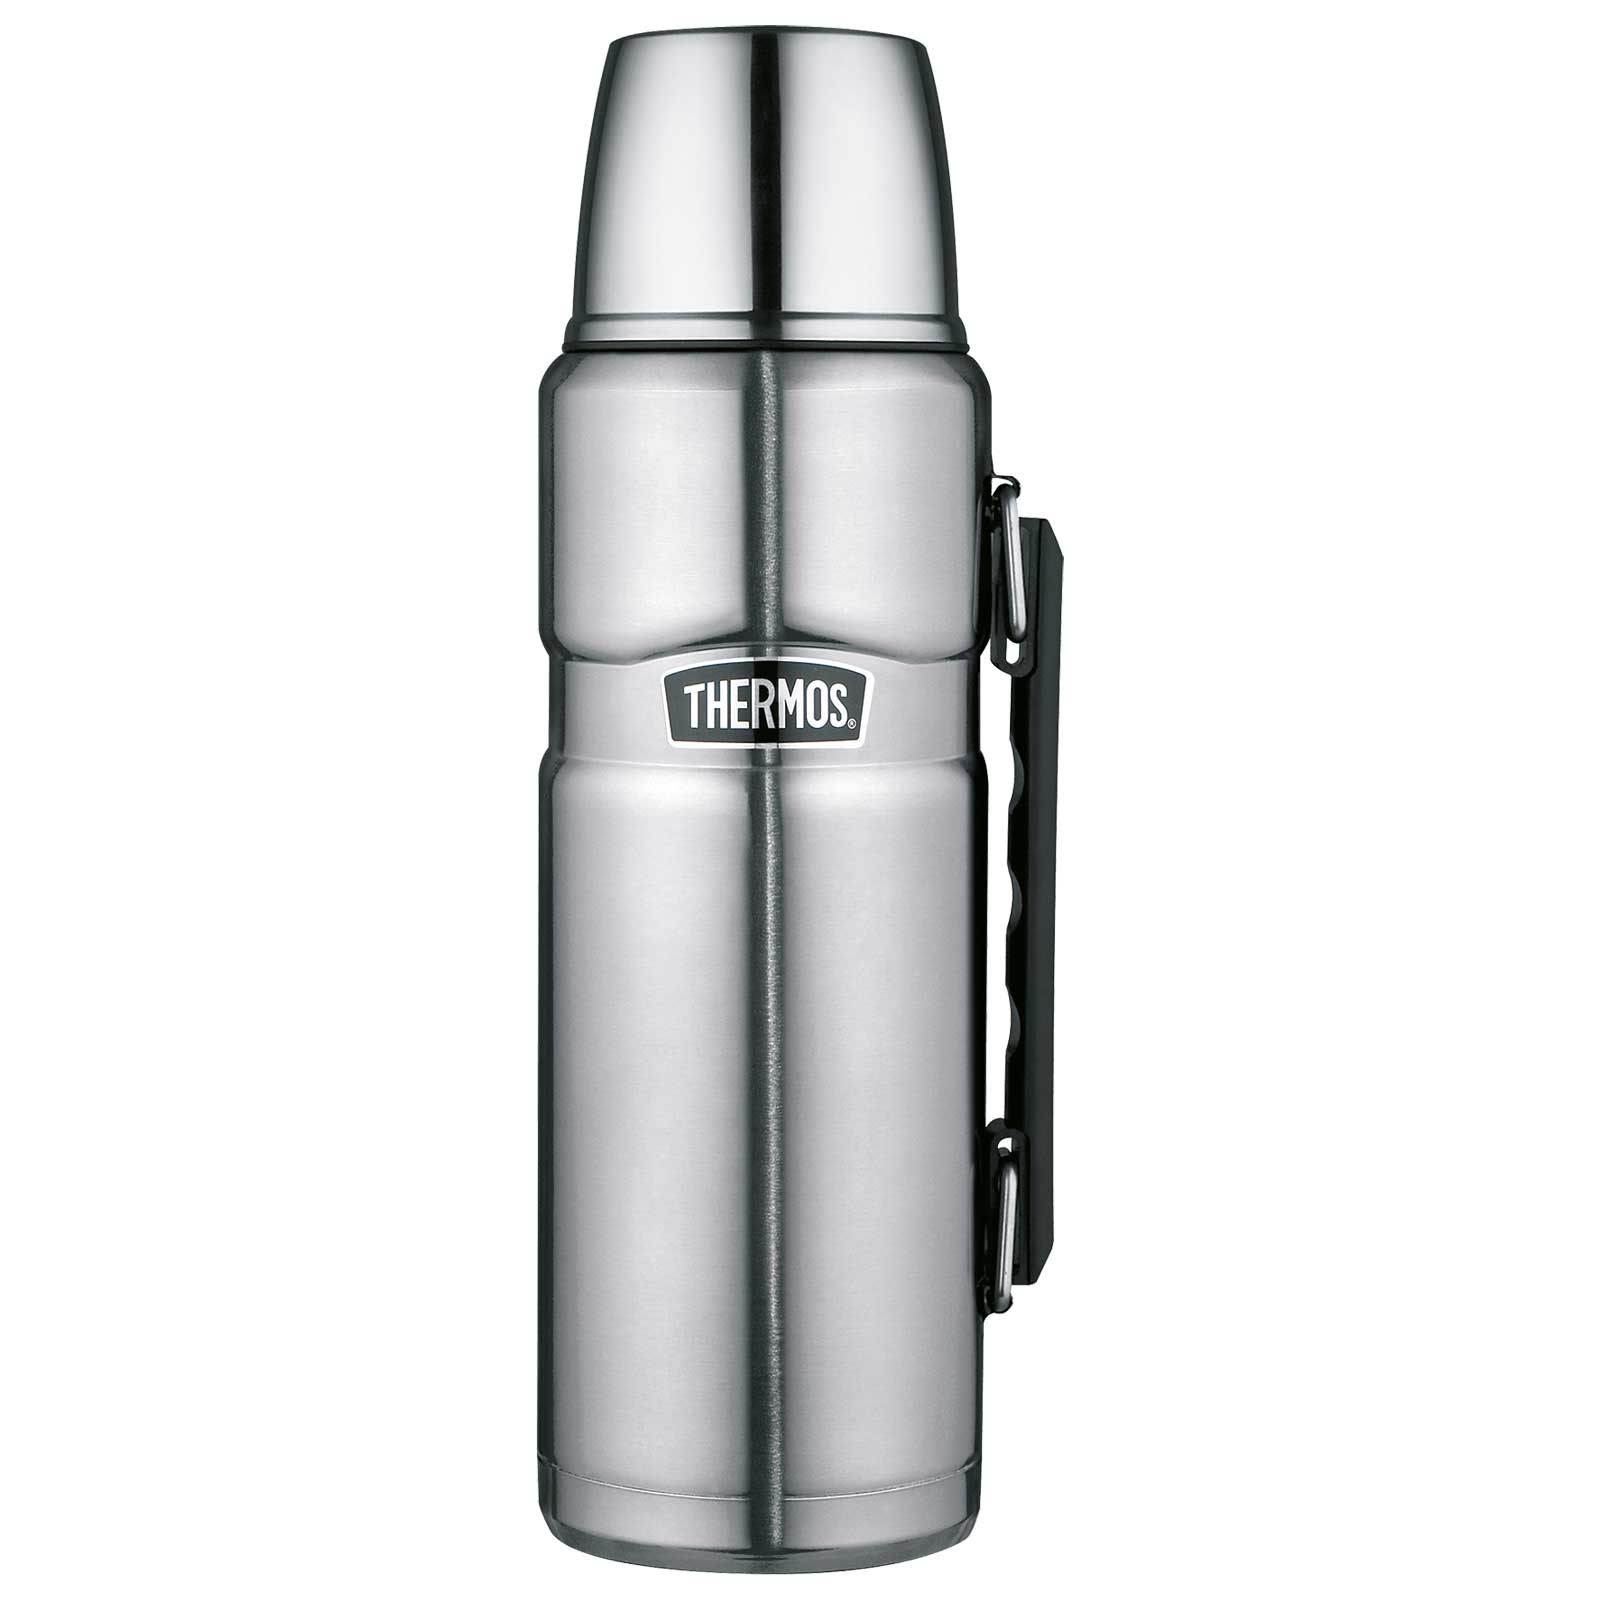 Productfoto van THERMOS® Stainless King Insulated Beverage Bottle 1.2L - stainless steel mat